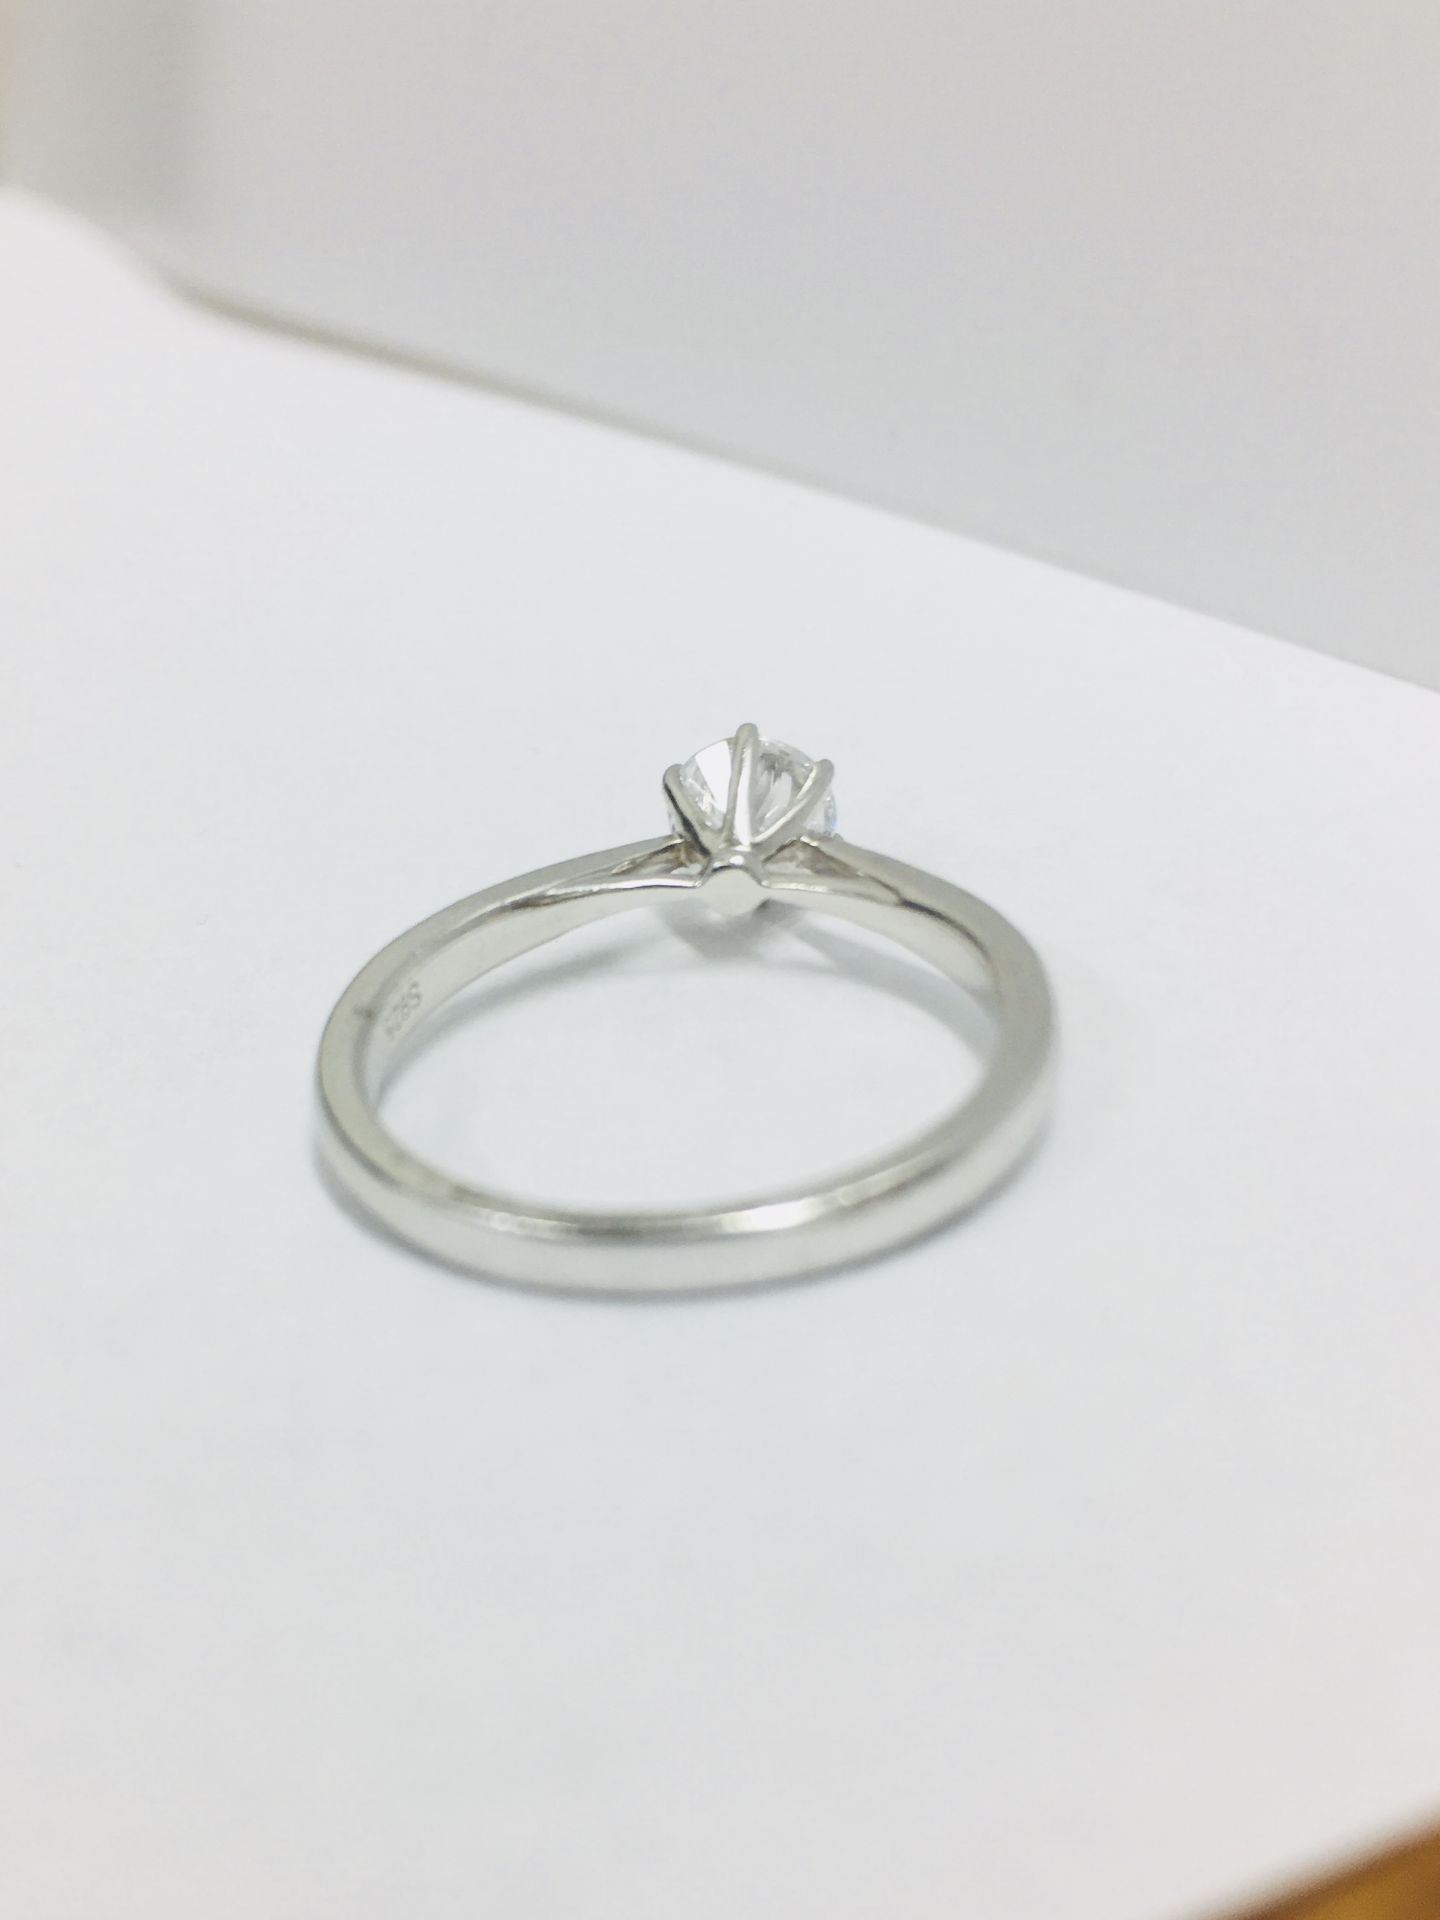 1ct diamond solitaire ring with diamond set shoulders,1.01ct natural brilliant cut diamond si2 - Image 3 of 4